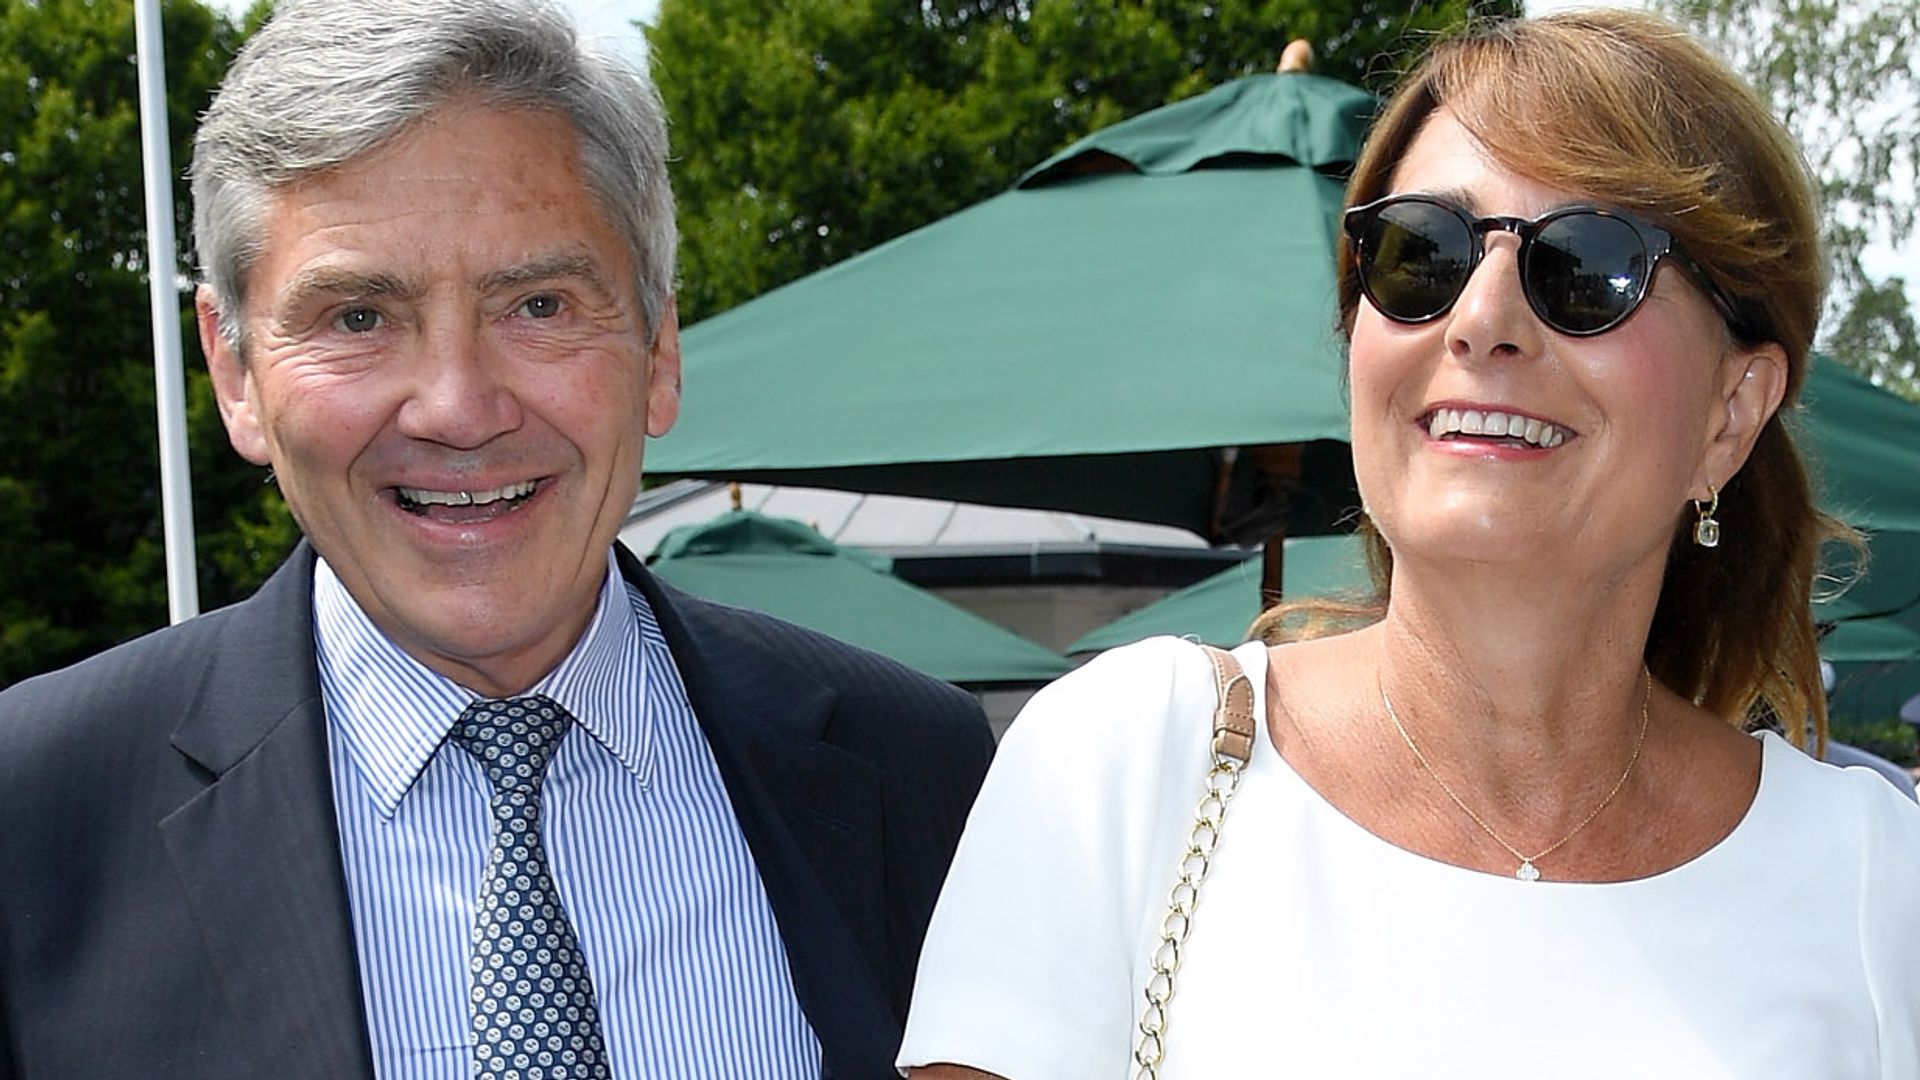 Michael Middleton in a suit with Carole Middleton in a white dress and sunglasses